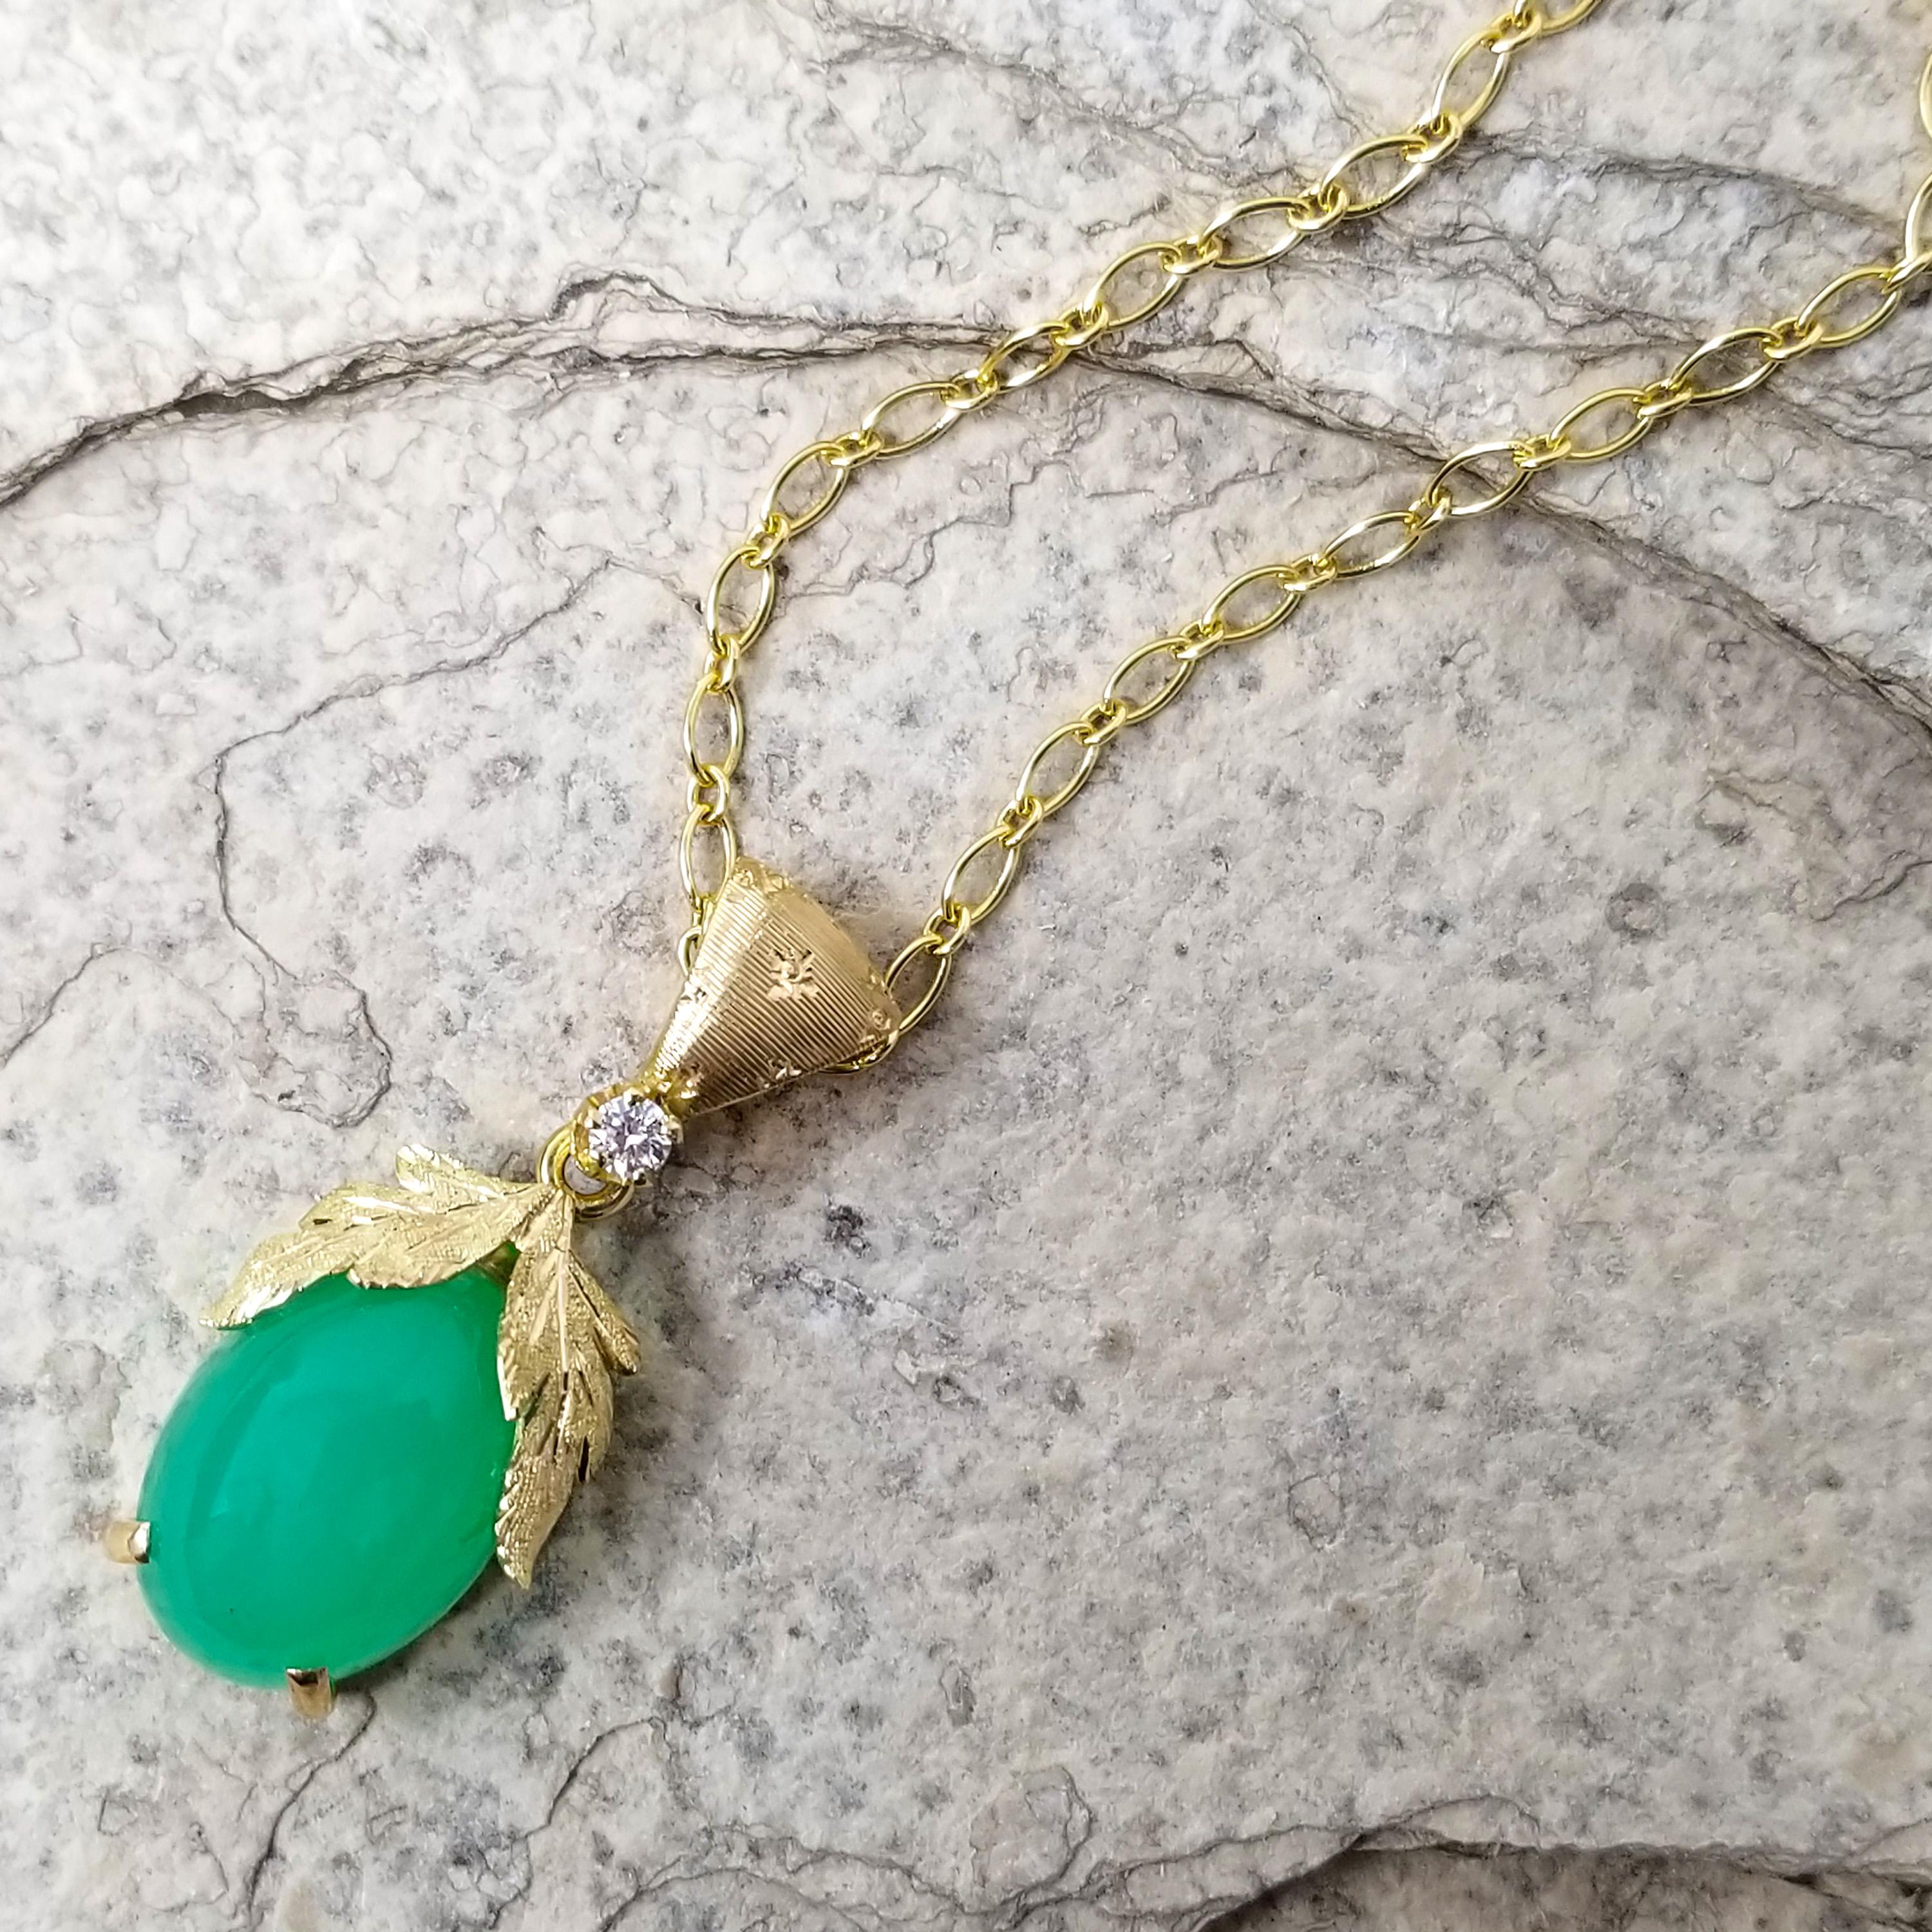 The vivid apple green of this exquisite chrysoprase is breath-taking in its intensity. The soft translucence allows the light to play through the gemstone.

The Sylvia pendant embraces this carefully chosen gemstone in richly detailed, Florentine